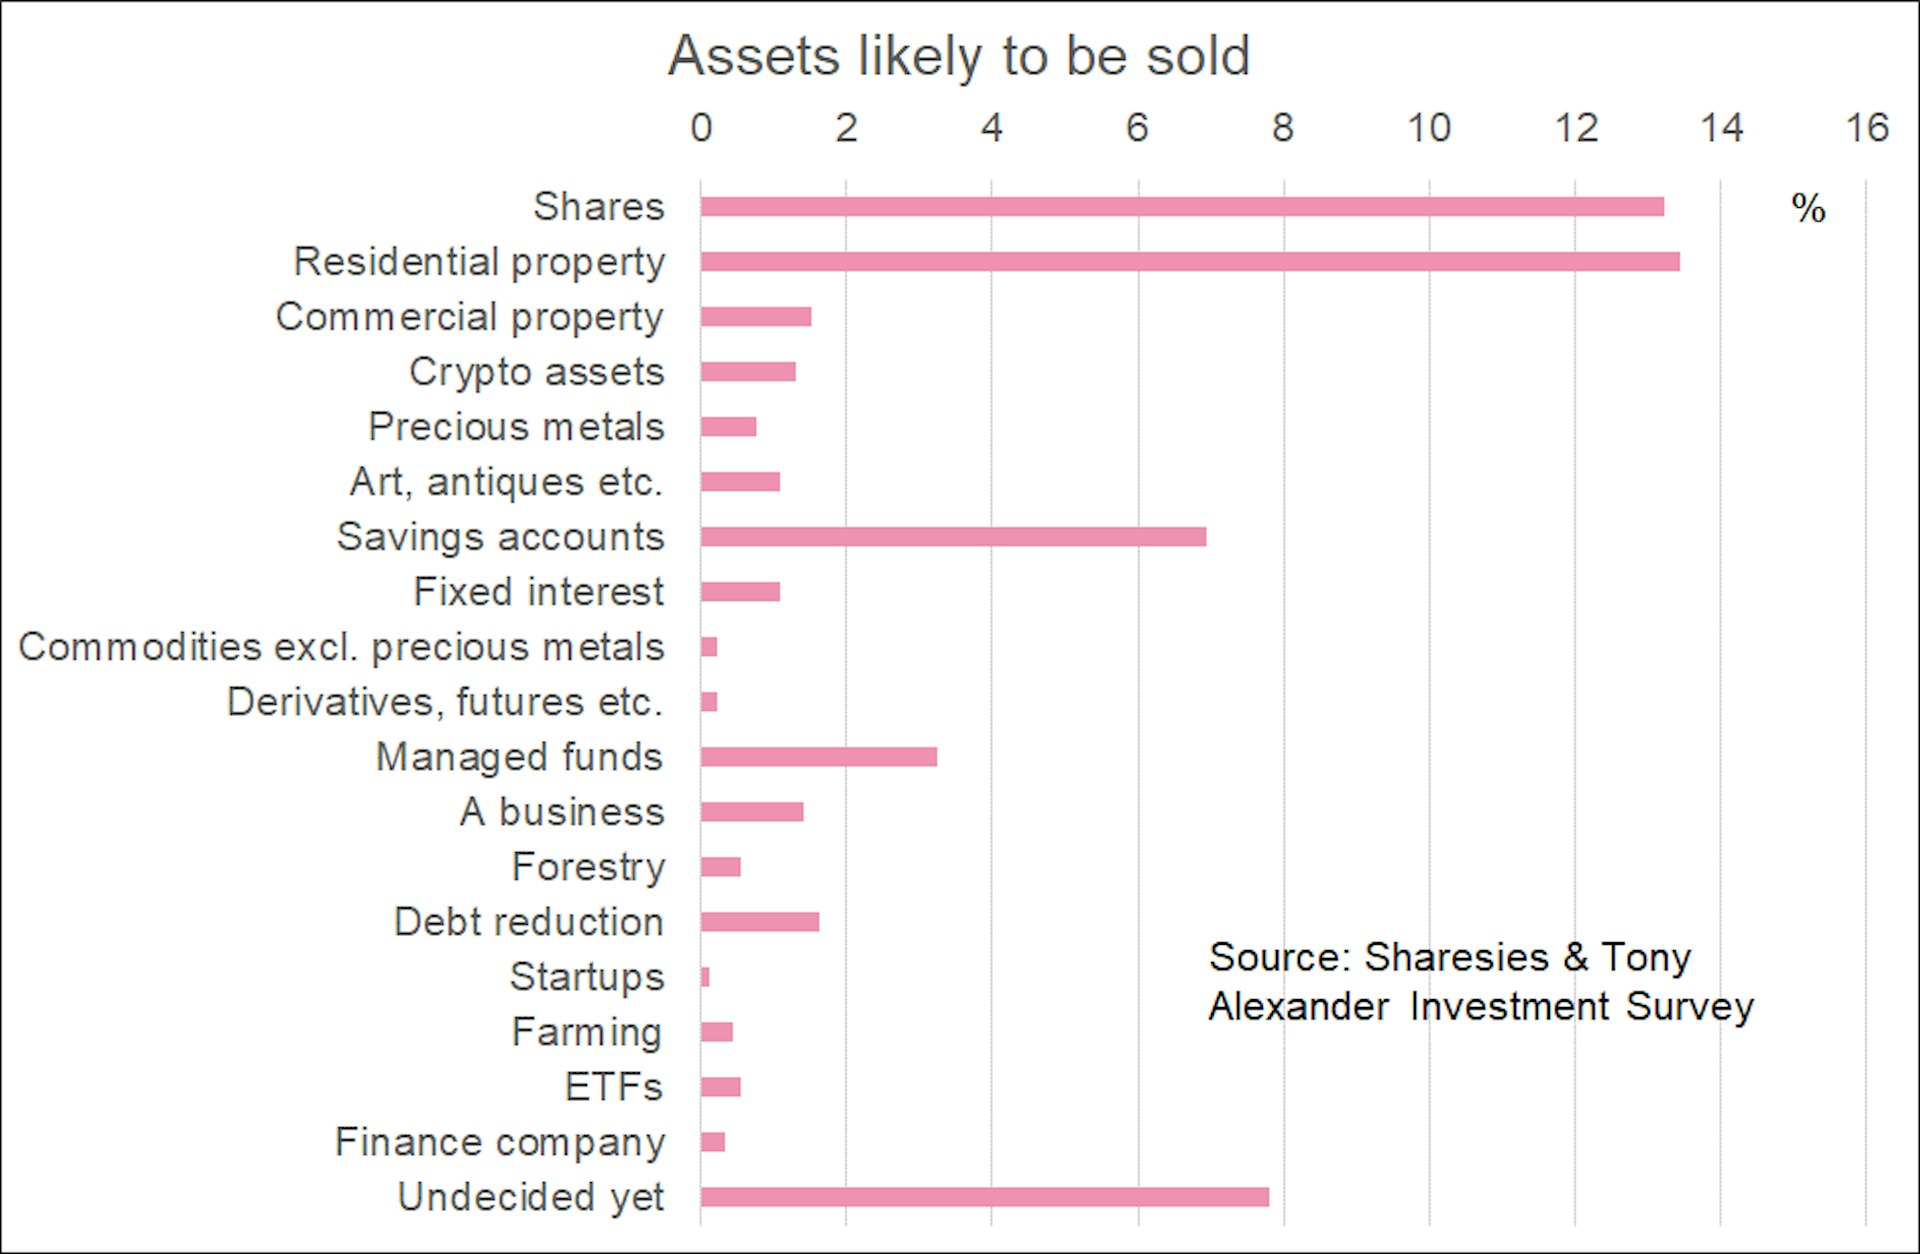 Bar graph showing the assets investors are likely to sell. Residential property is slightly higher than shares.